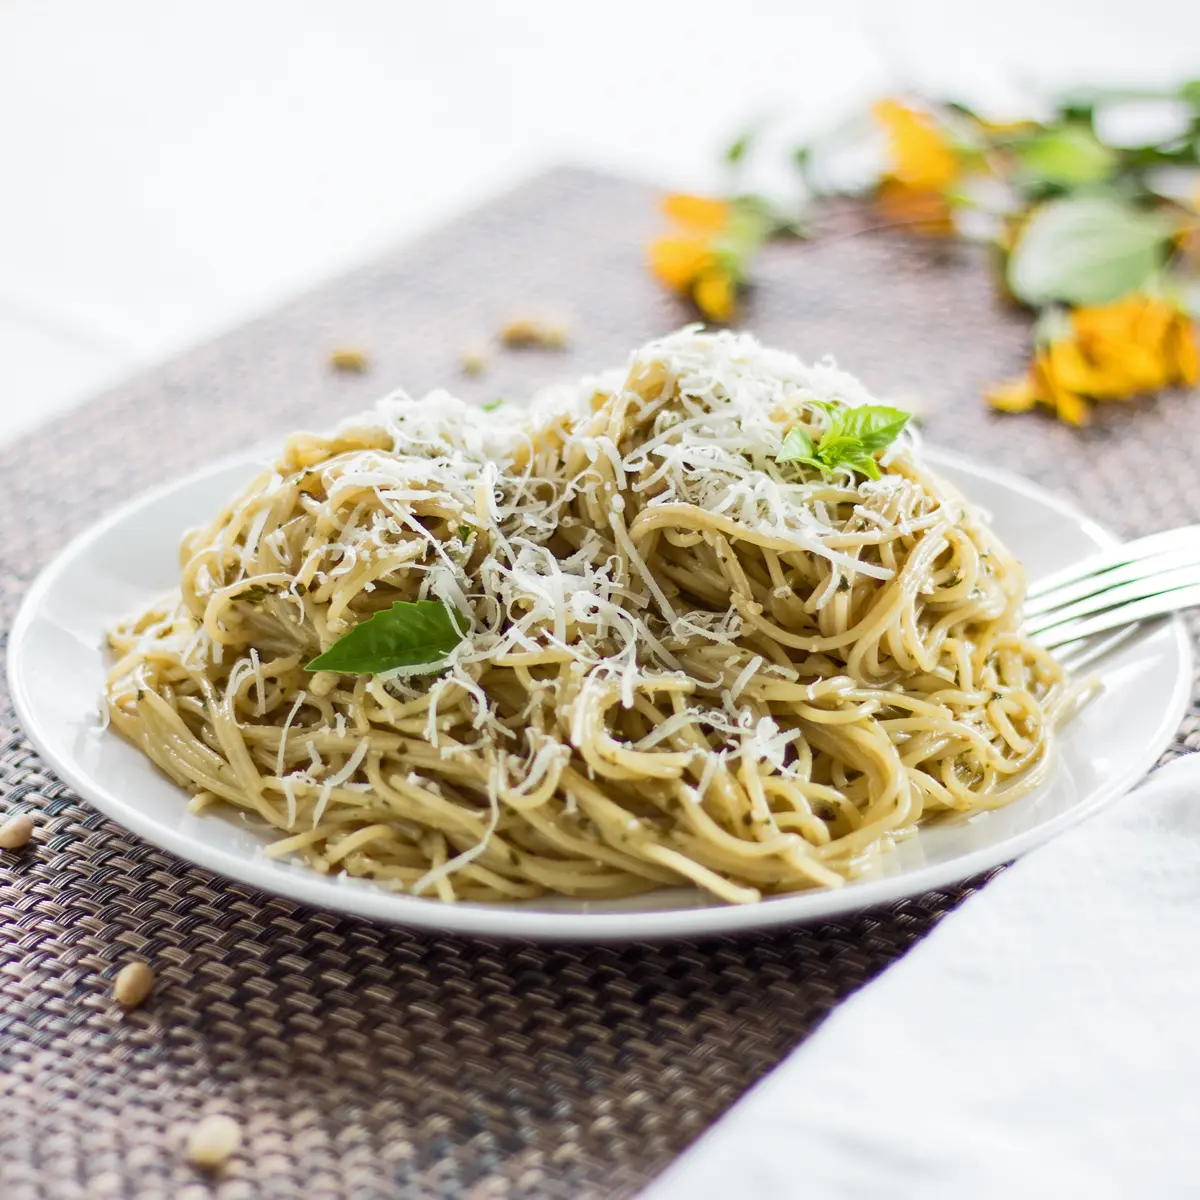 Large square image angled side view of dished pasta with pesto coating garnished with fresh grated Parmesan cheese and a few young Genovese basil leaves.